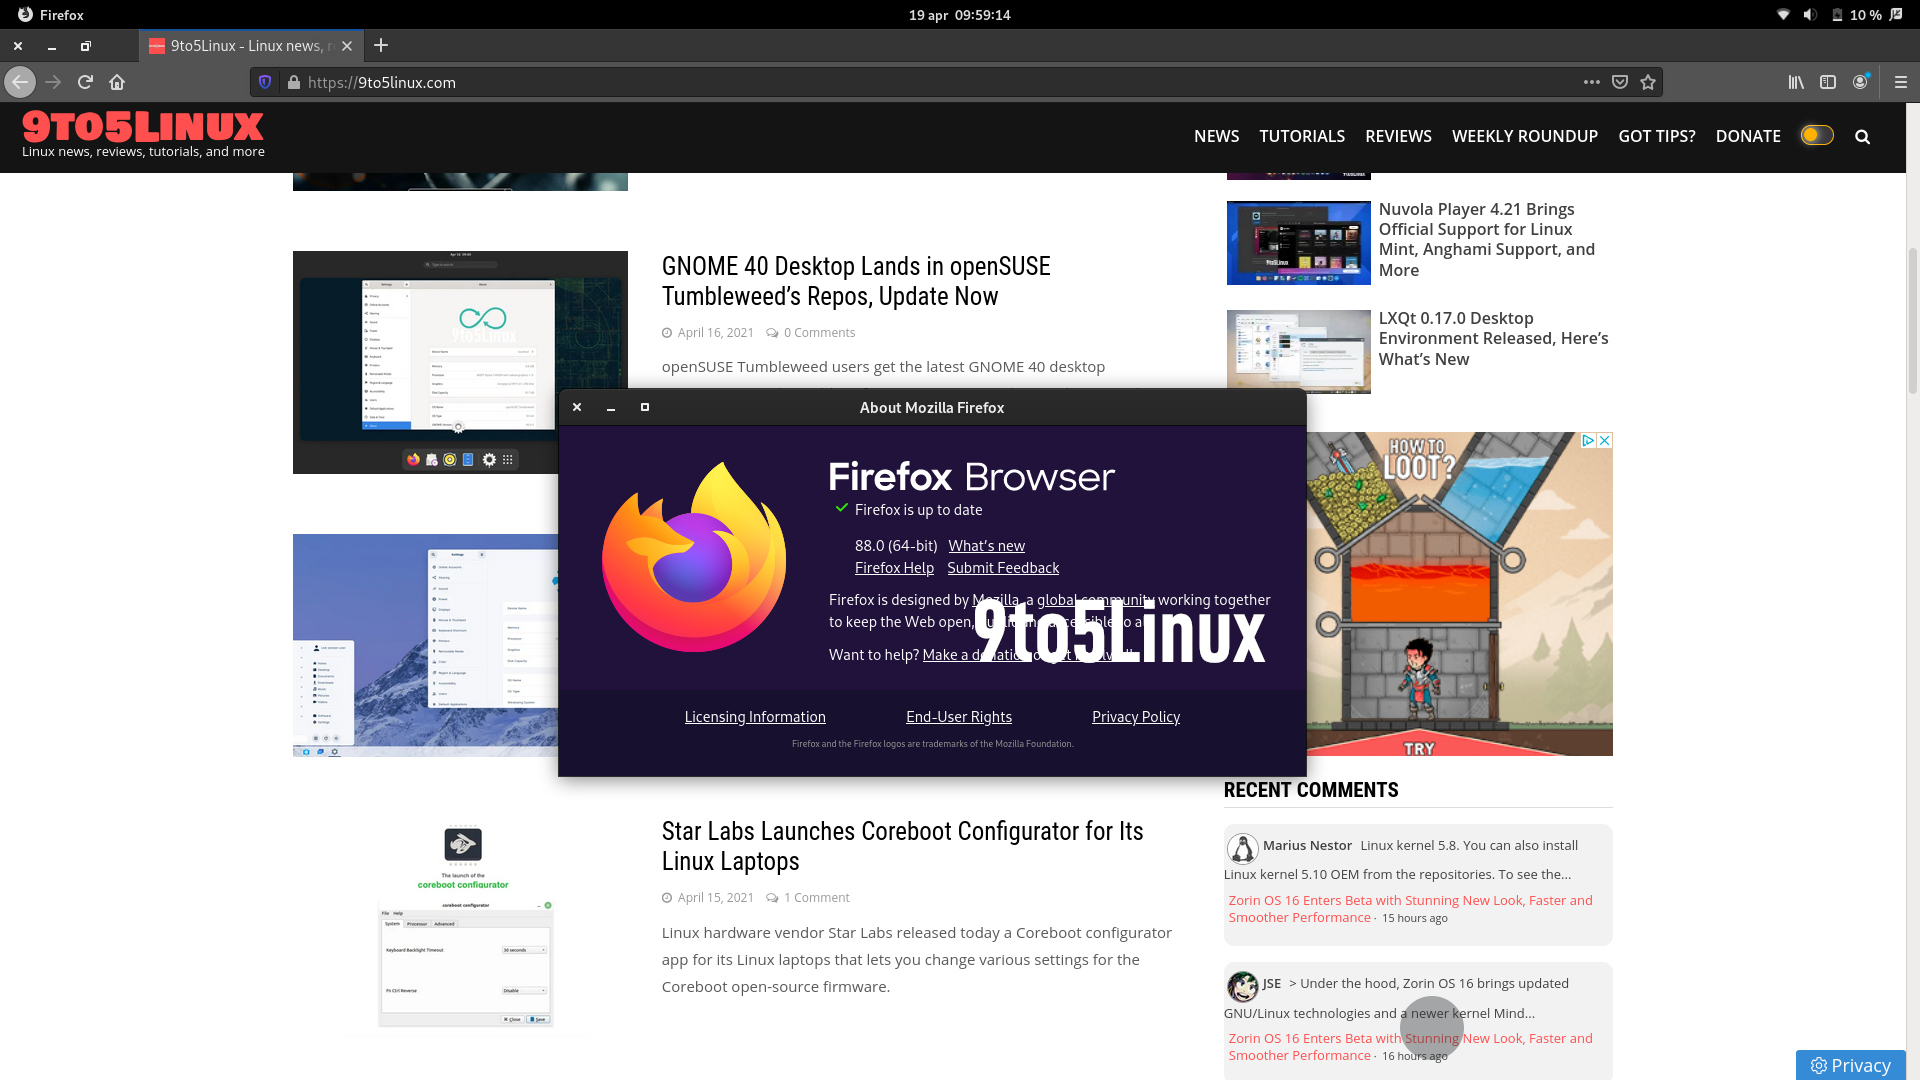 Firefox 88 Is Now Available for Download, Enables WebRender for KDE/Xfce Intel/AMD Users